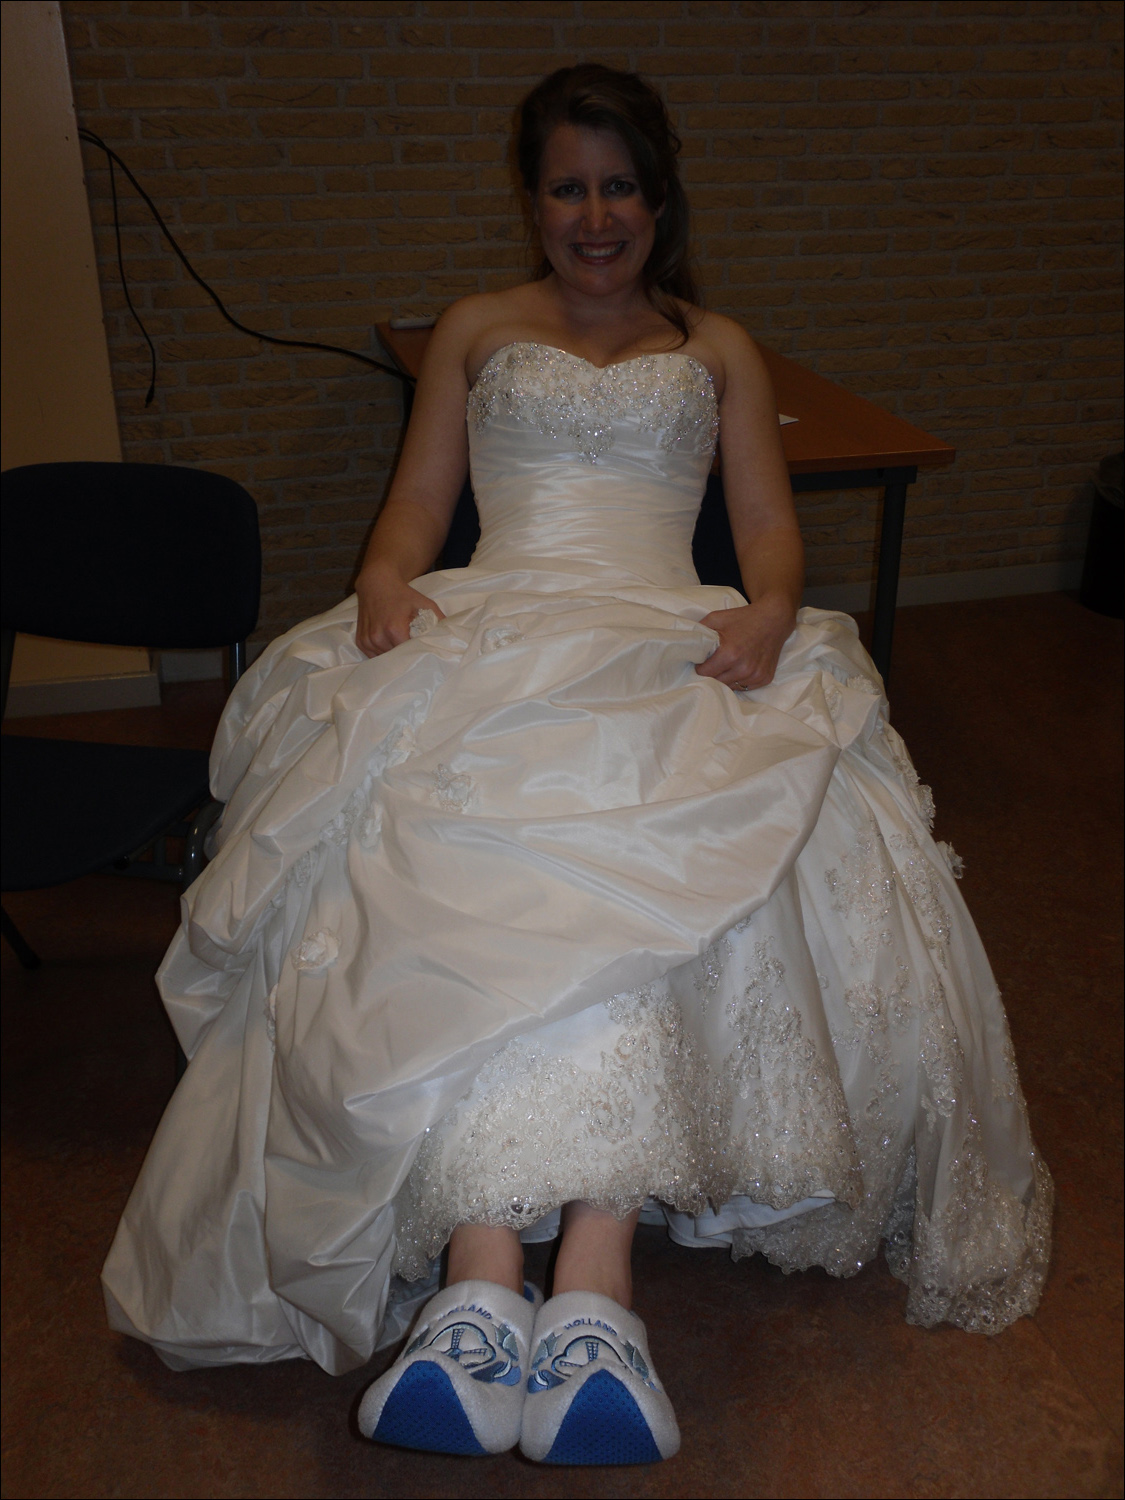 Becky in her wedding dress for the second time in 2 months